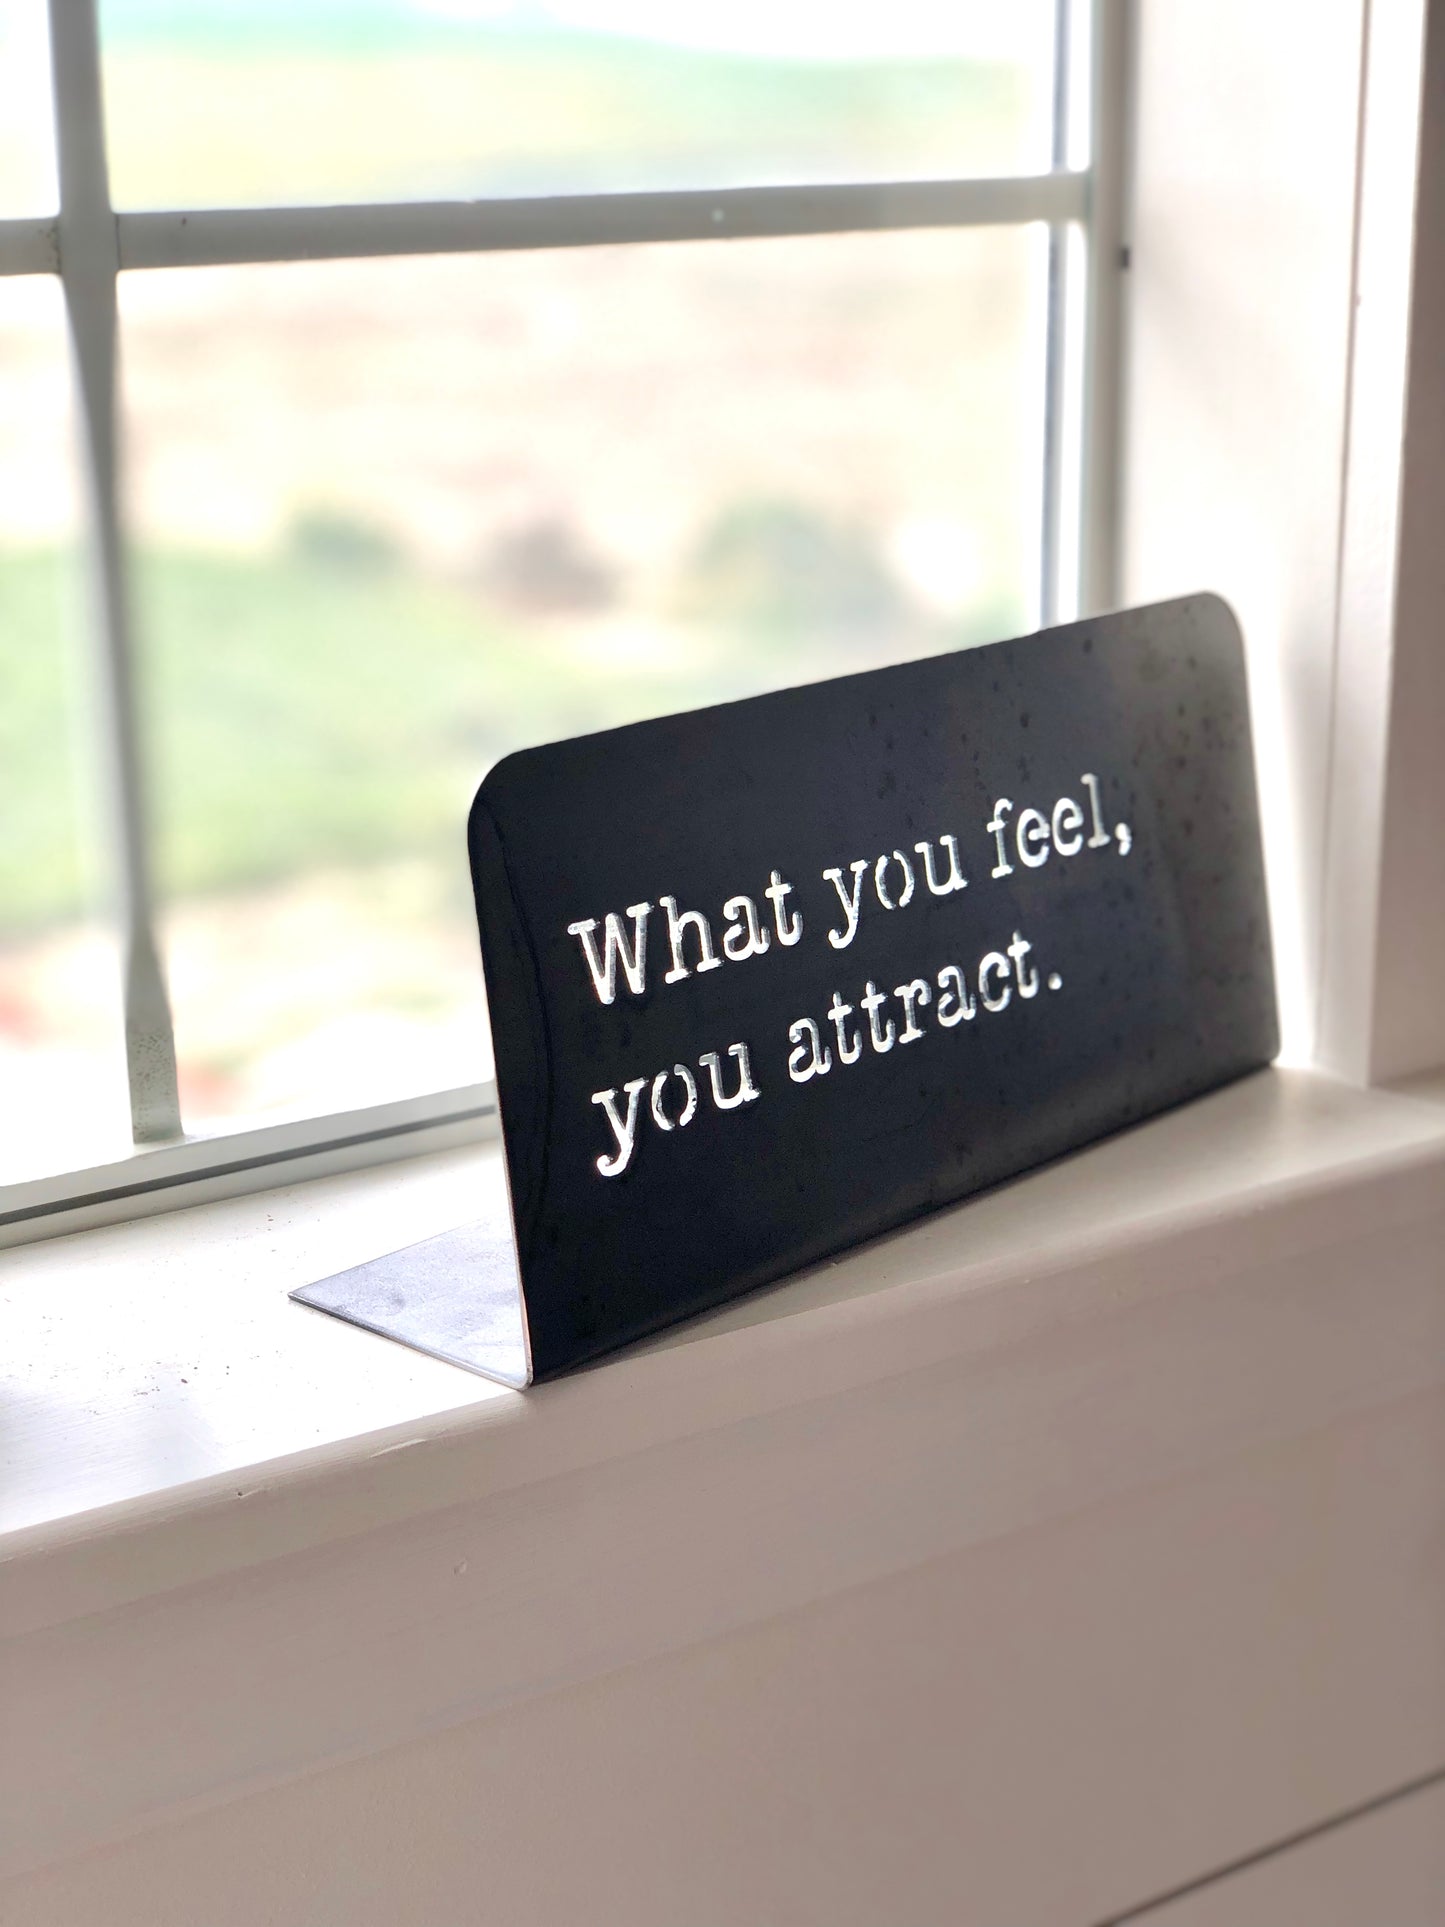 What you feel, you attract Standing metal mindfulness sign